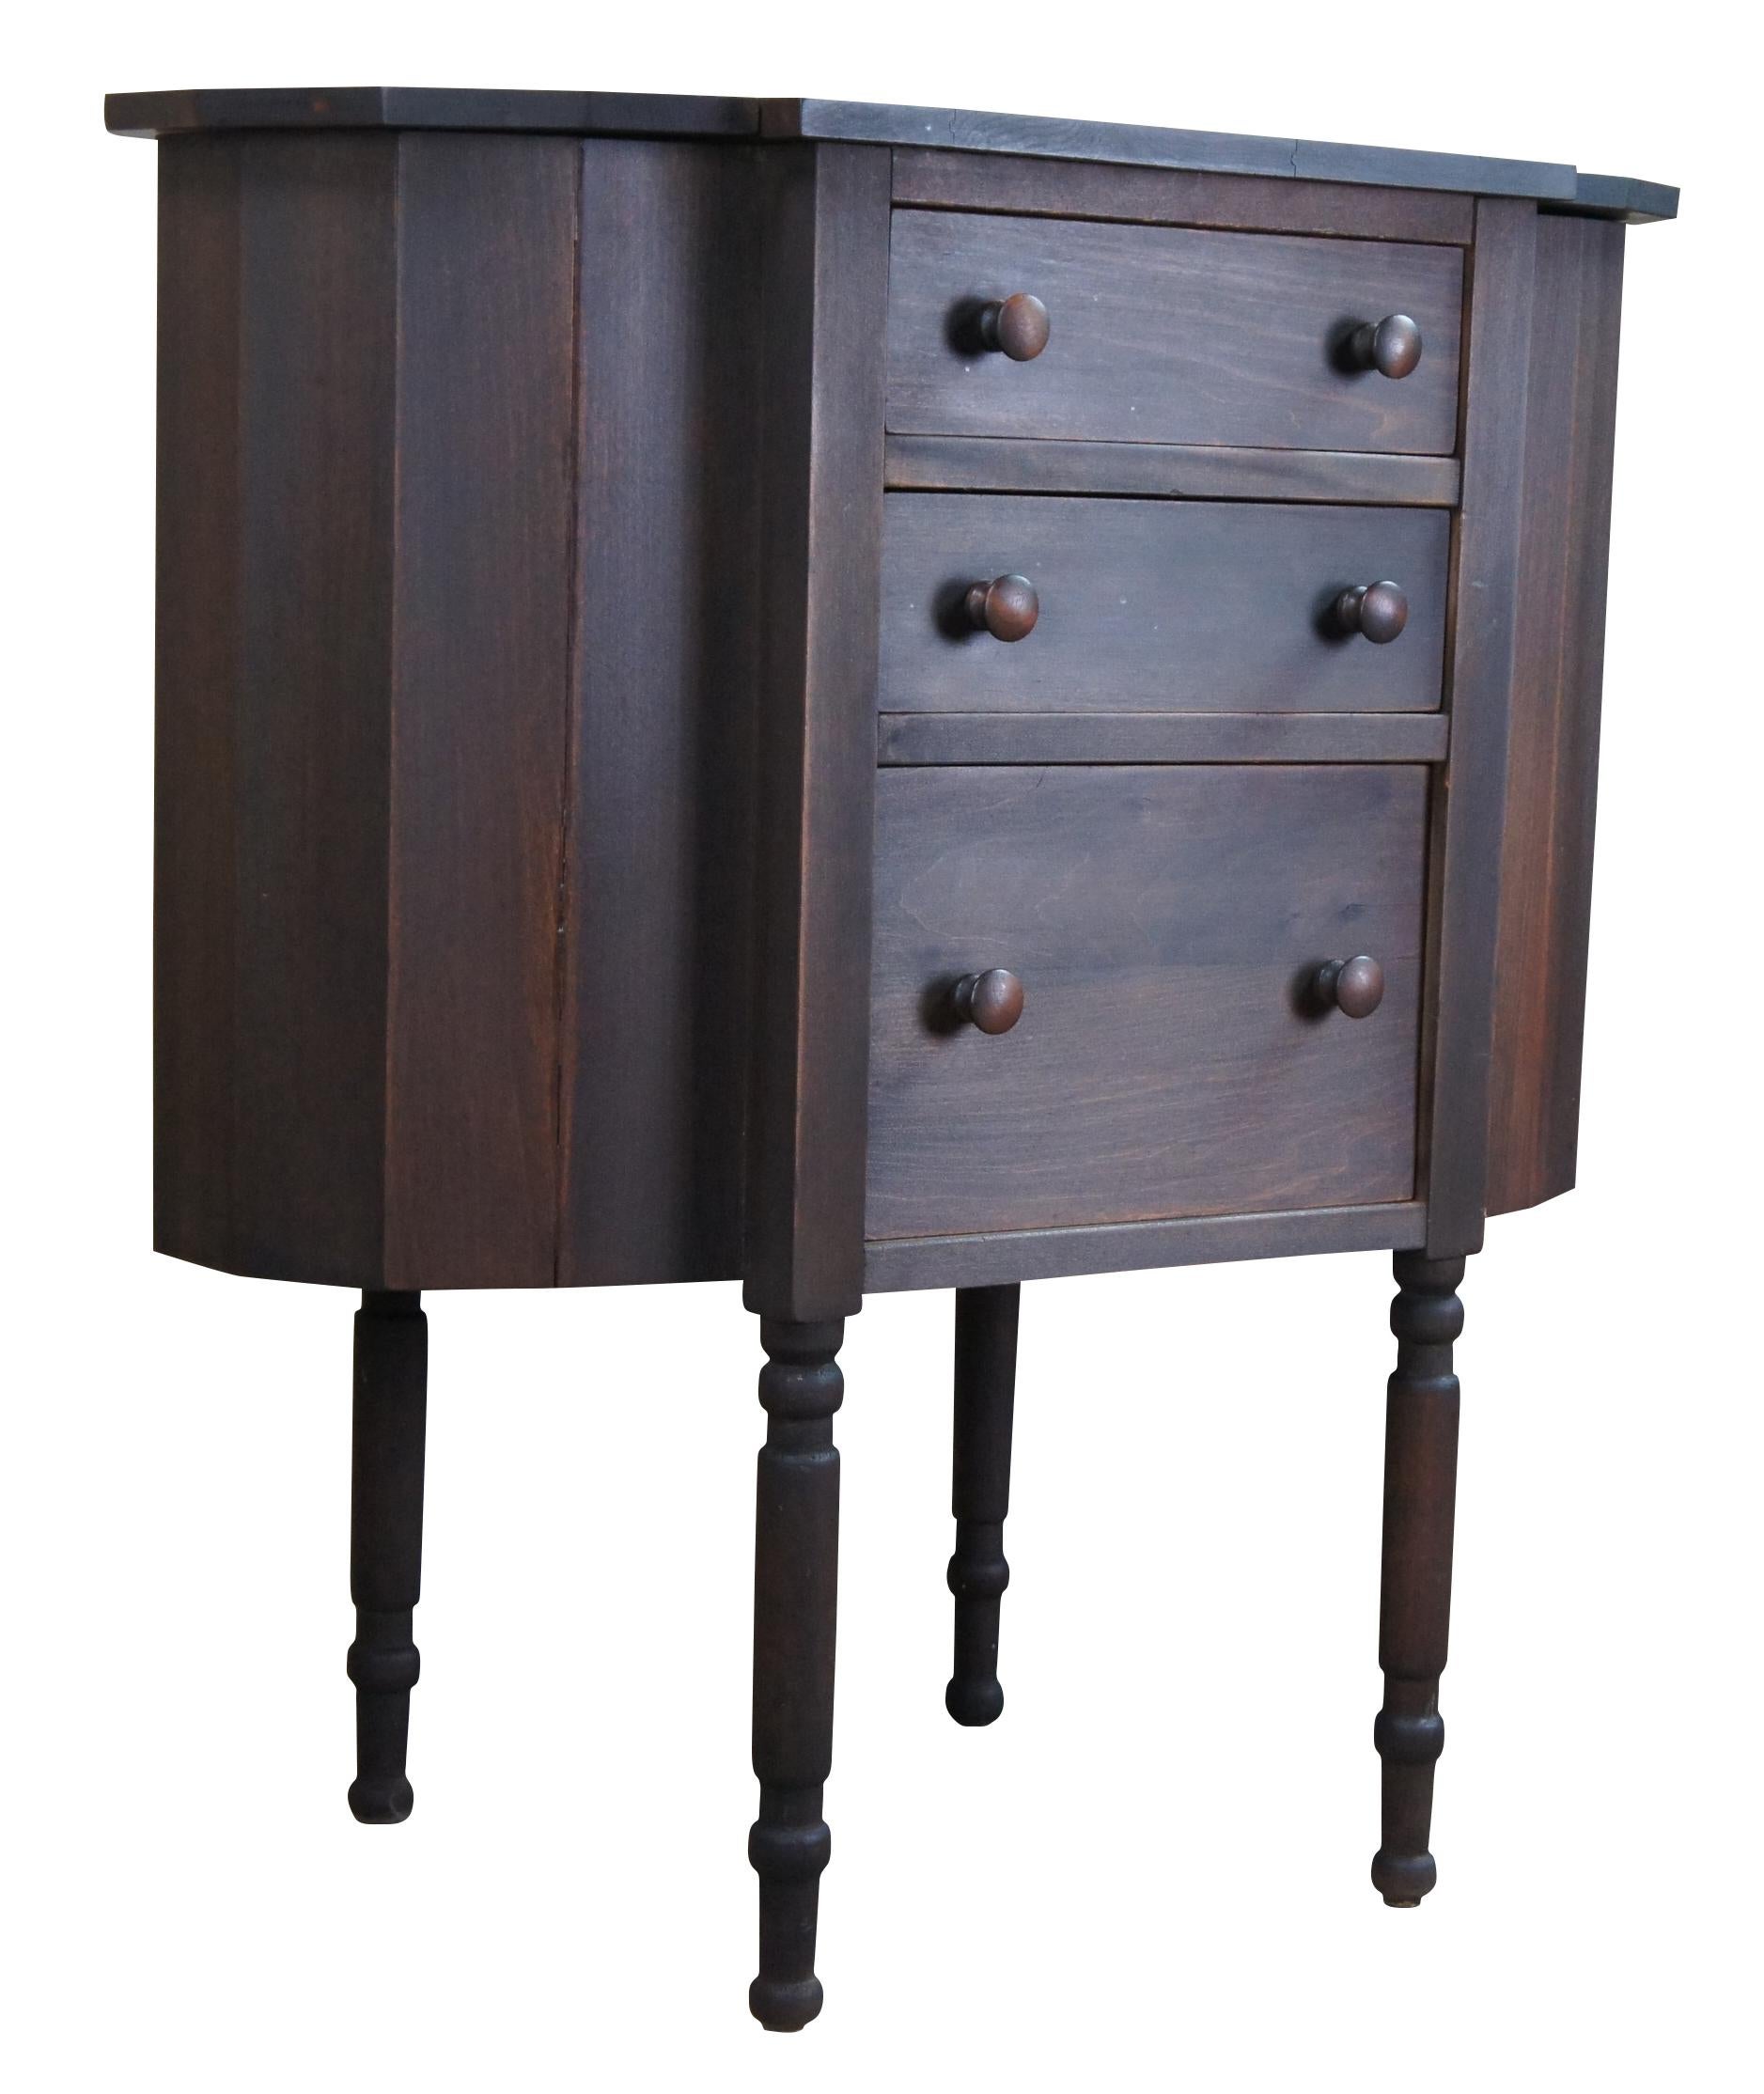 Antique Martha Washington style wooden sewing cabinet with two flip top end sections, three drawers, and turned spindle legs.
 